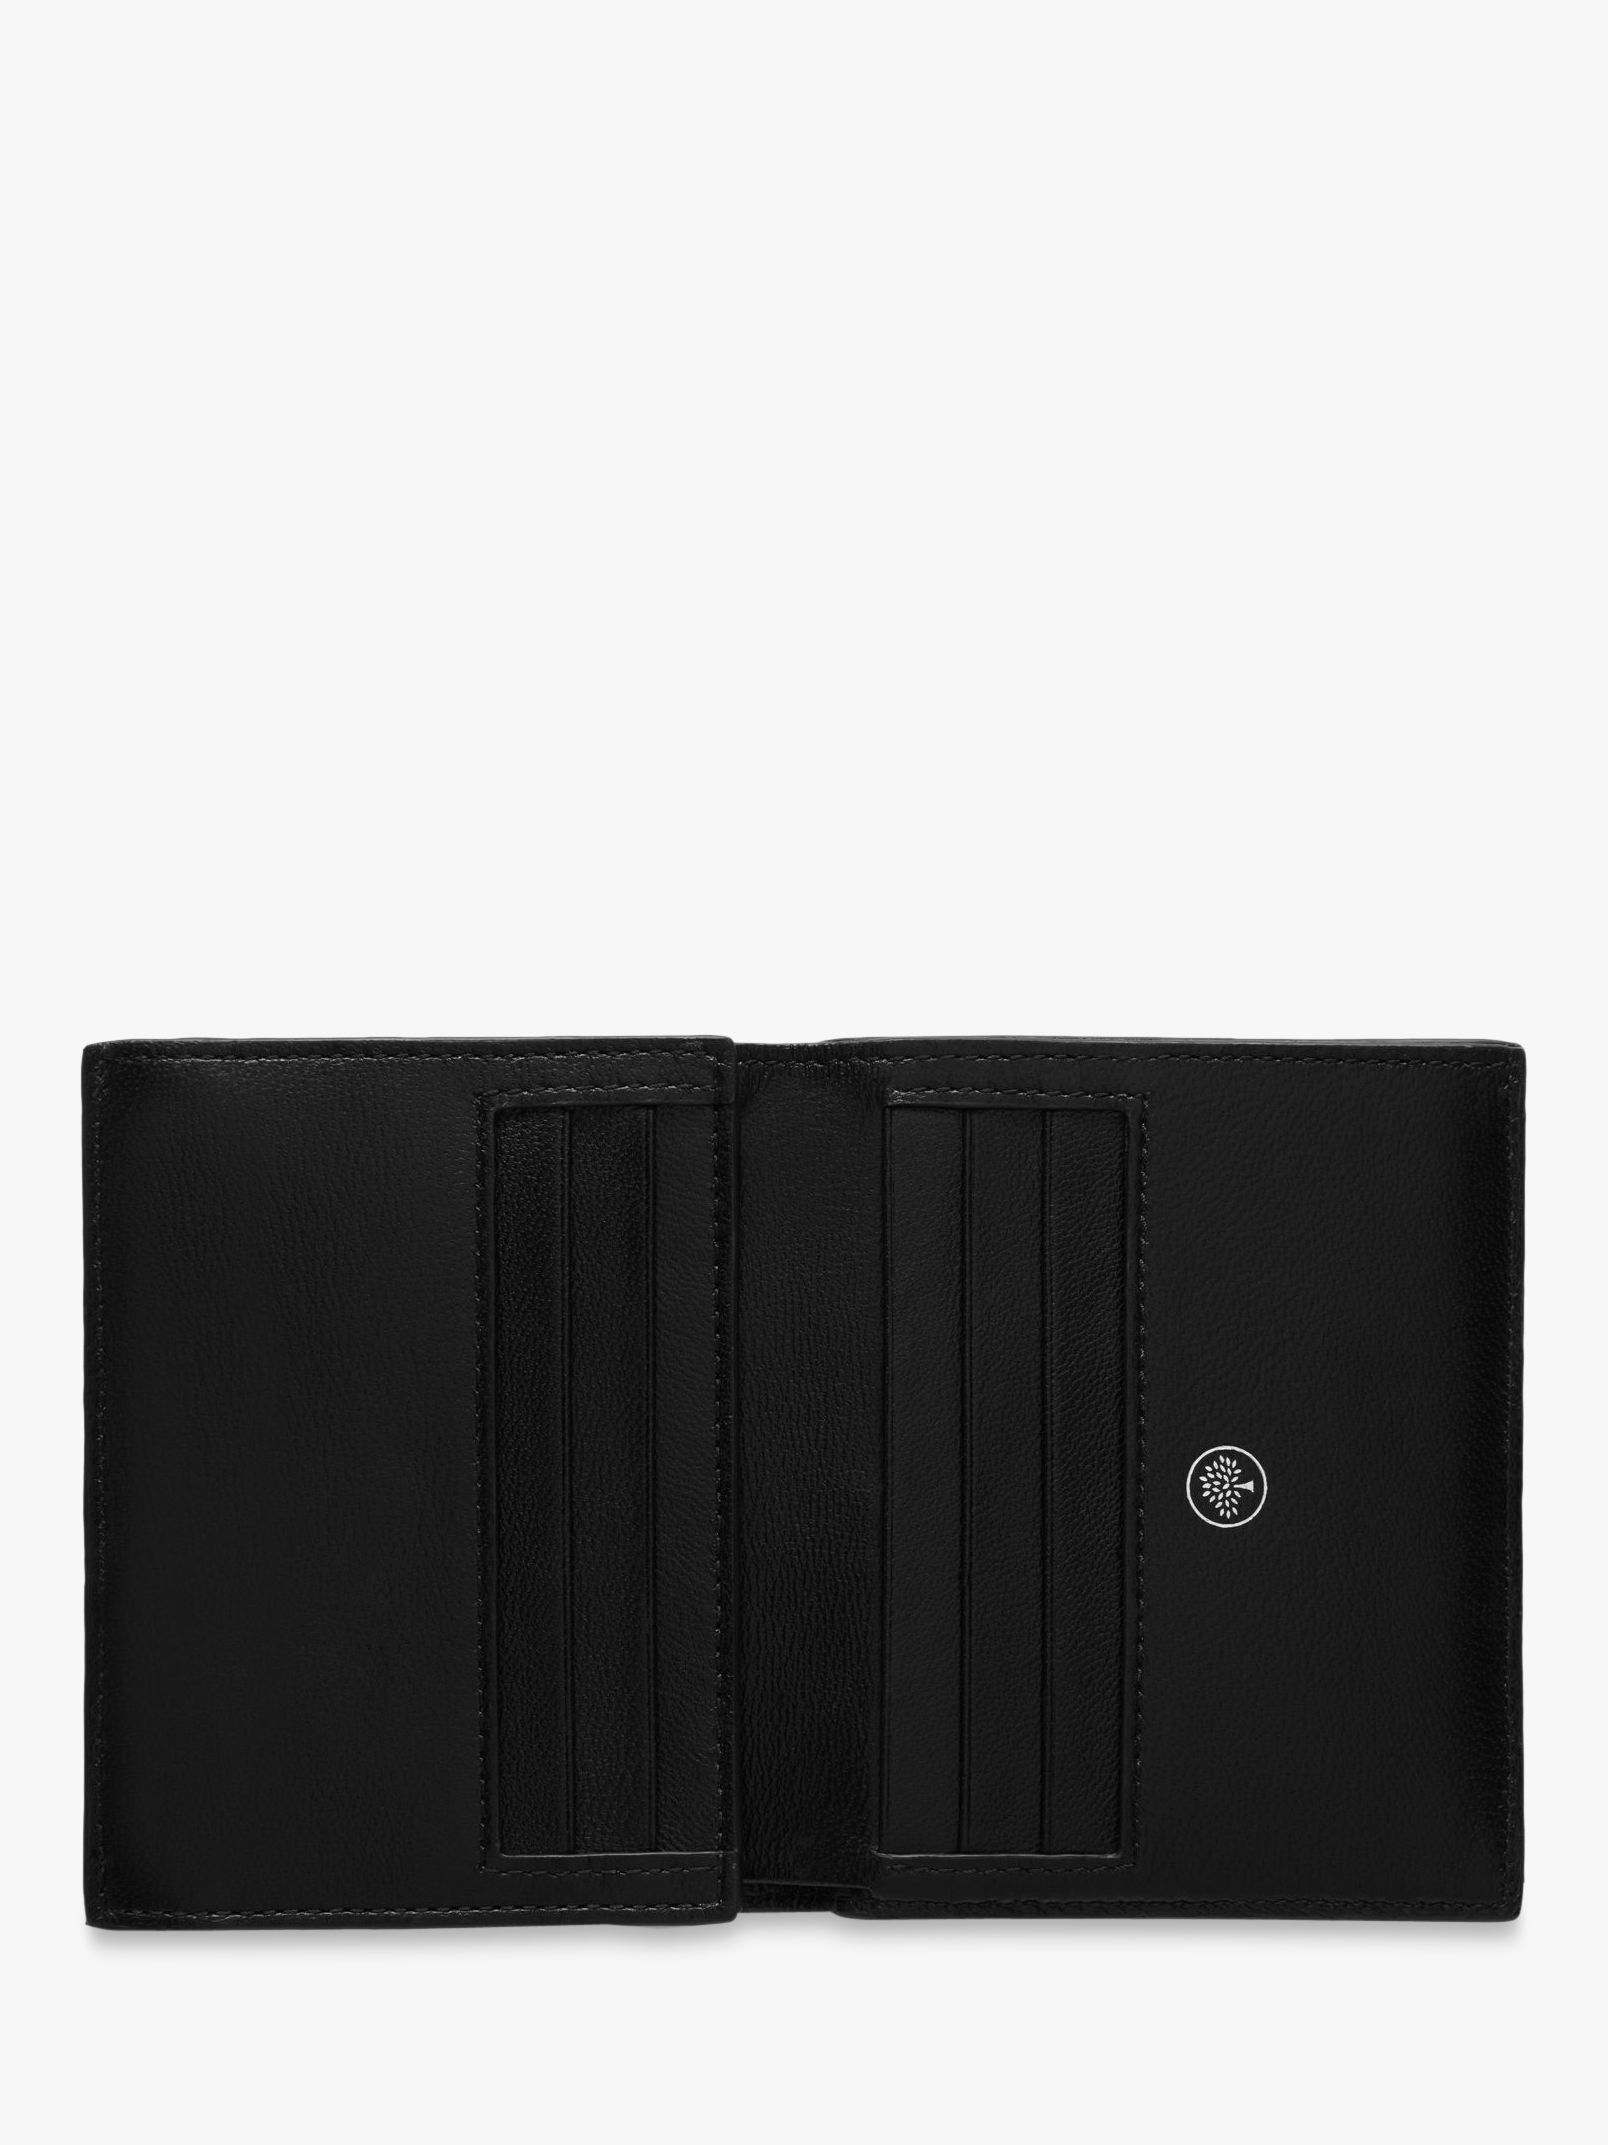 Mulberry Grain Veg Tanned Leather Trifold Wallet, Black at John Lewis ...